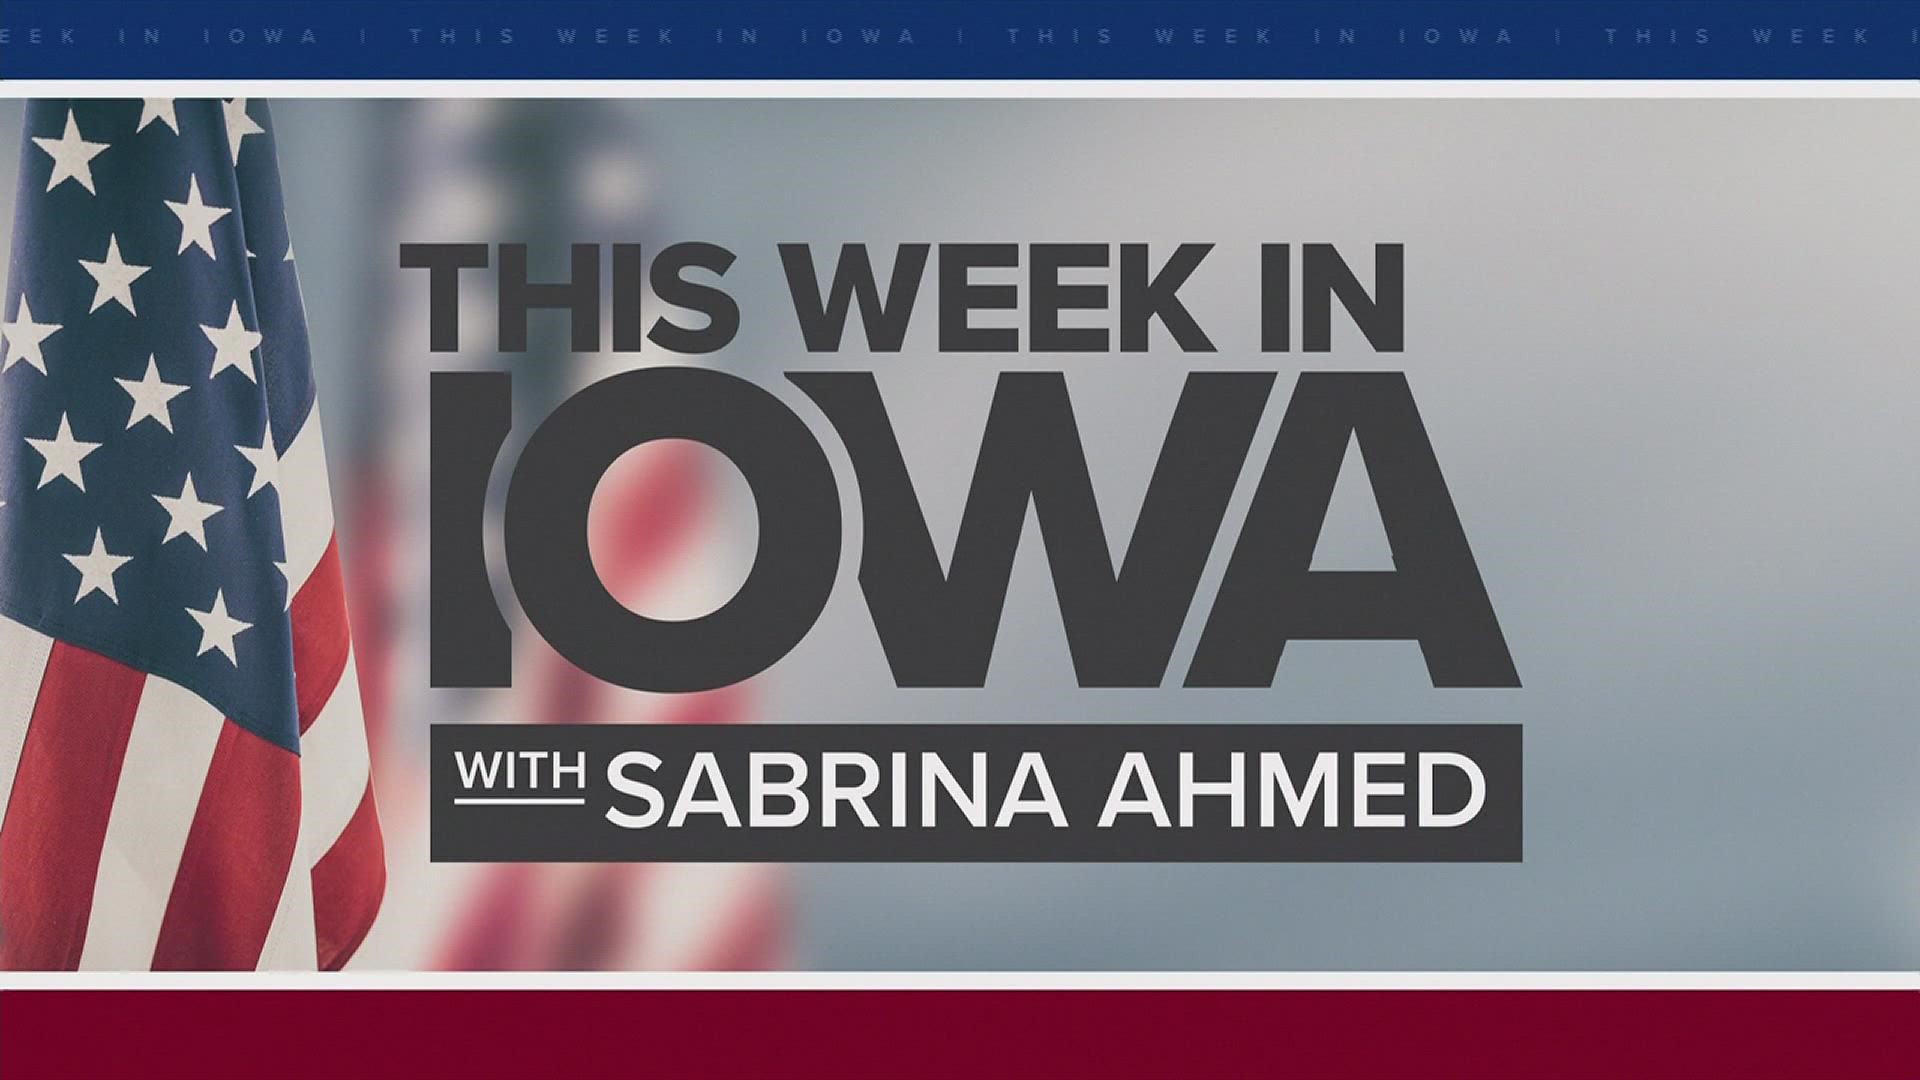 You can watch "This Week in Iowa" every Sunday at 9 a.m. on Local 5 or at WeAreIowa.com/Watch.